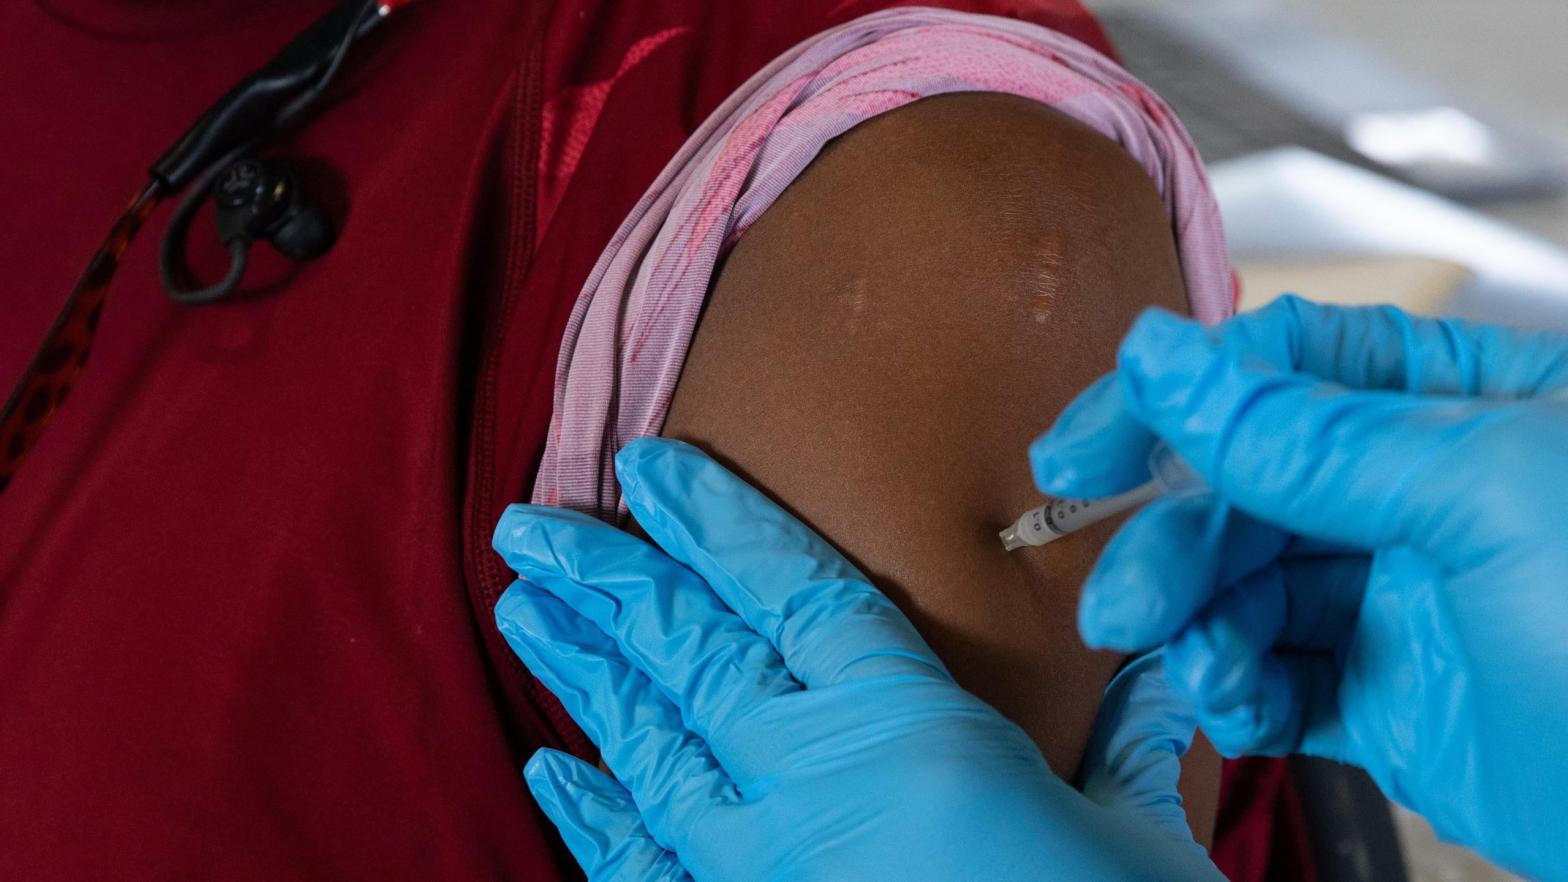 A patient receiving a coronavirus vaccine from the Oakland County Health Department clinic in Southfield, Michigan, in August 2021. (Photo: Emily Elconin, Getty Images)